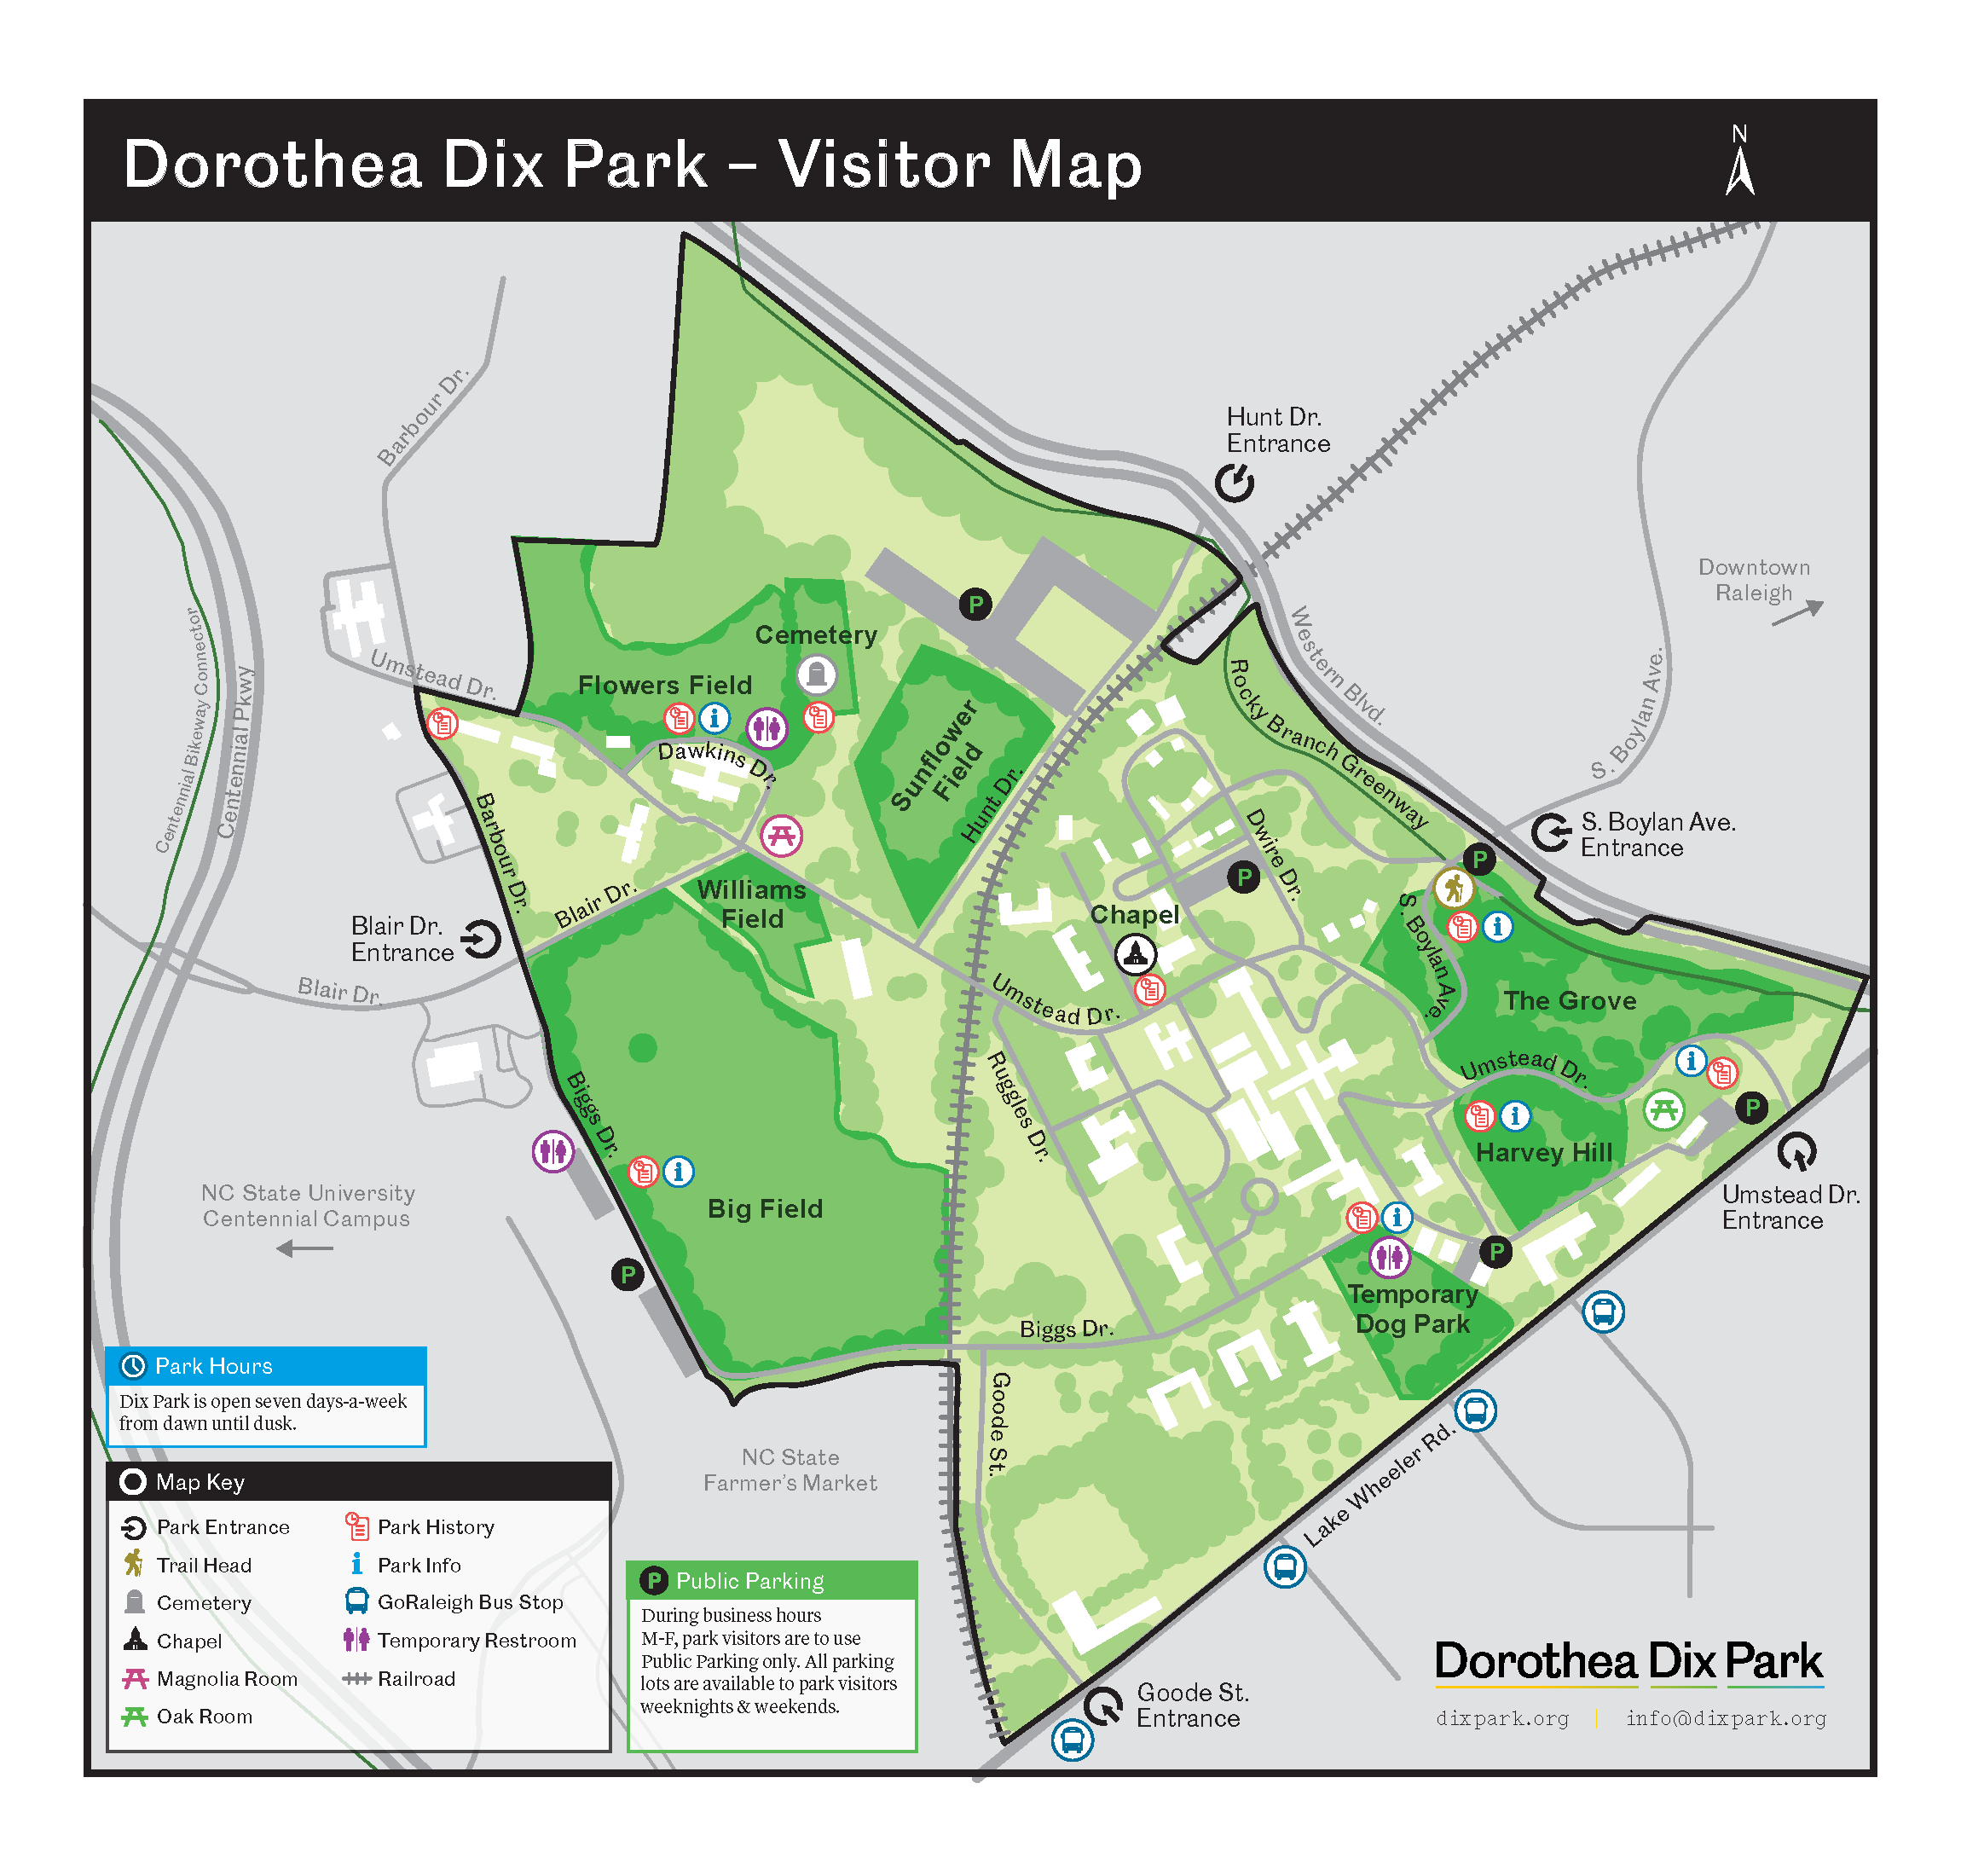 Dix Park Visitor Map